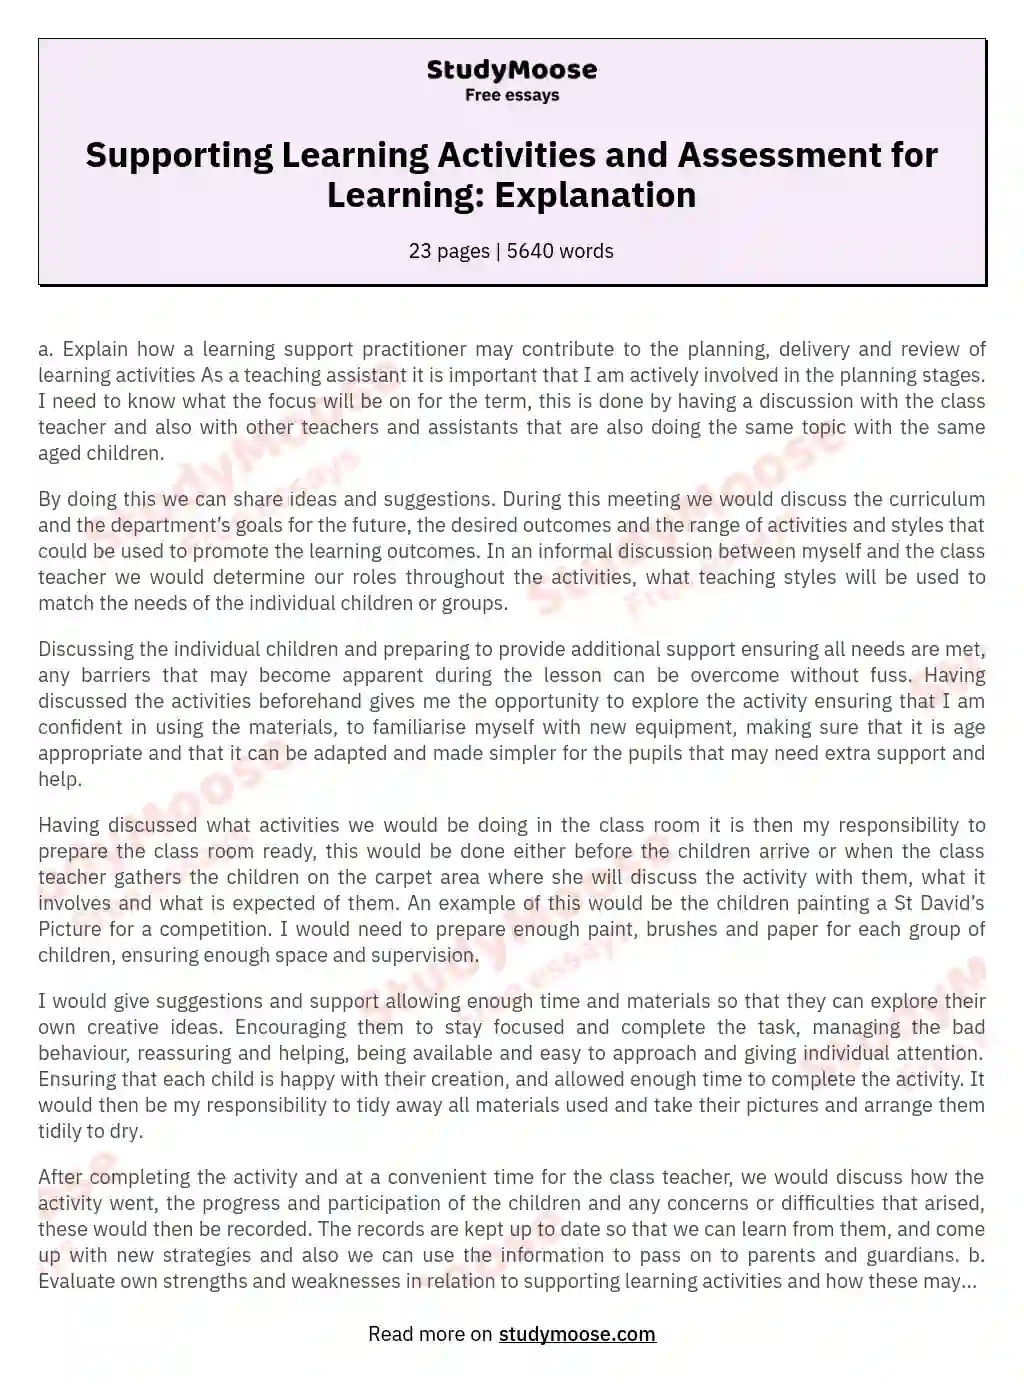 Supporting Learning Activities and Assessment for Learning: Explanation essay